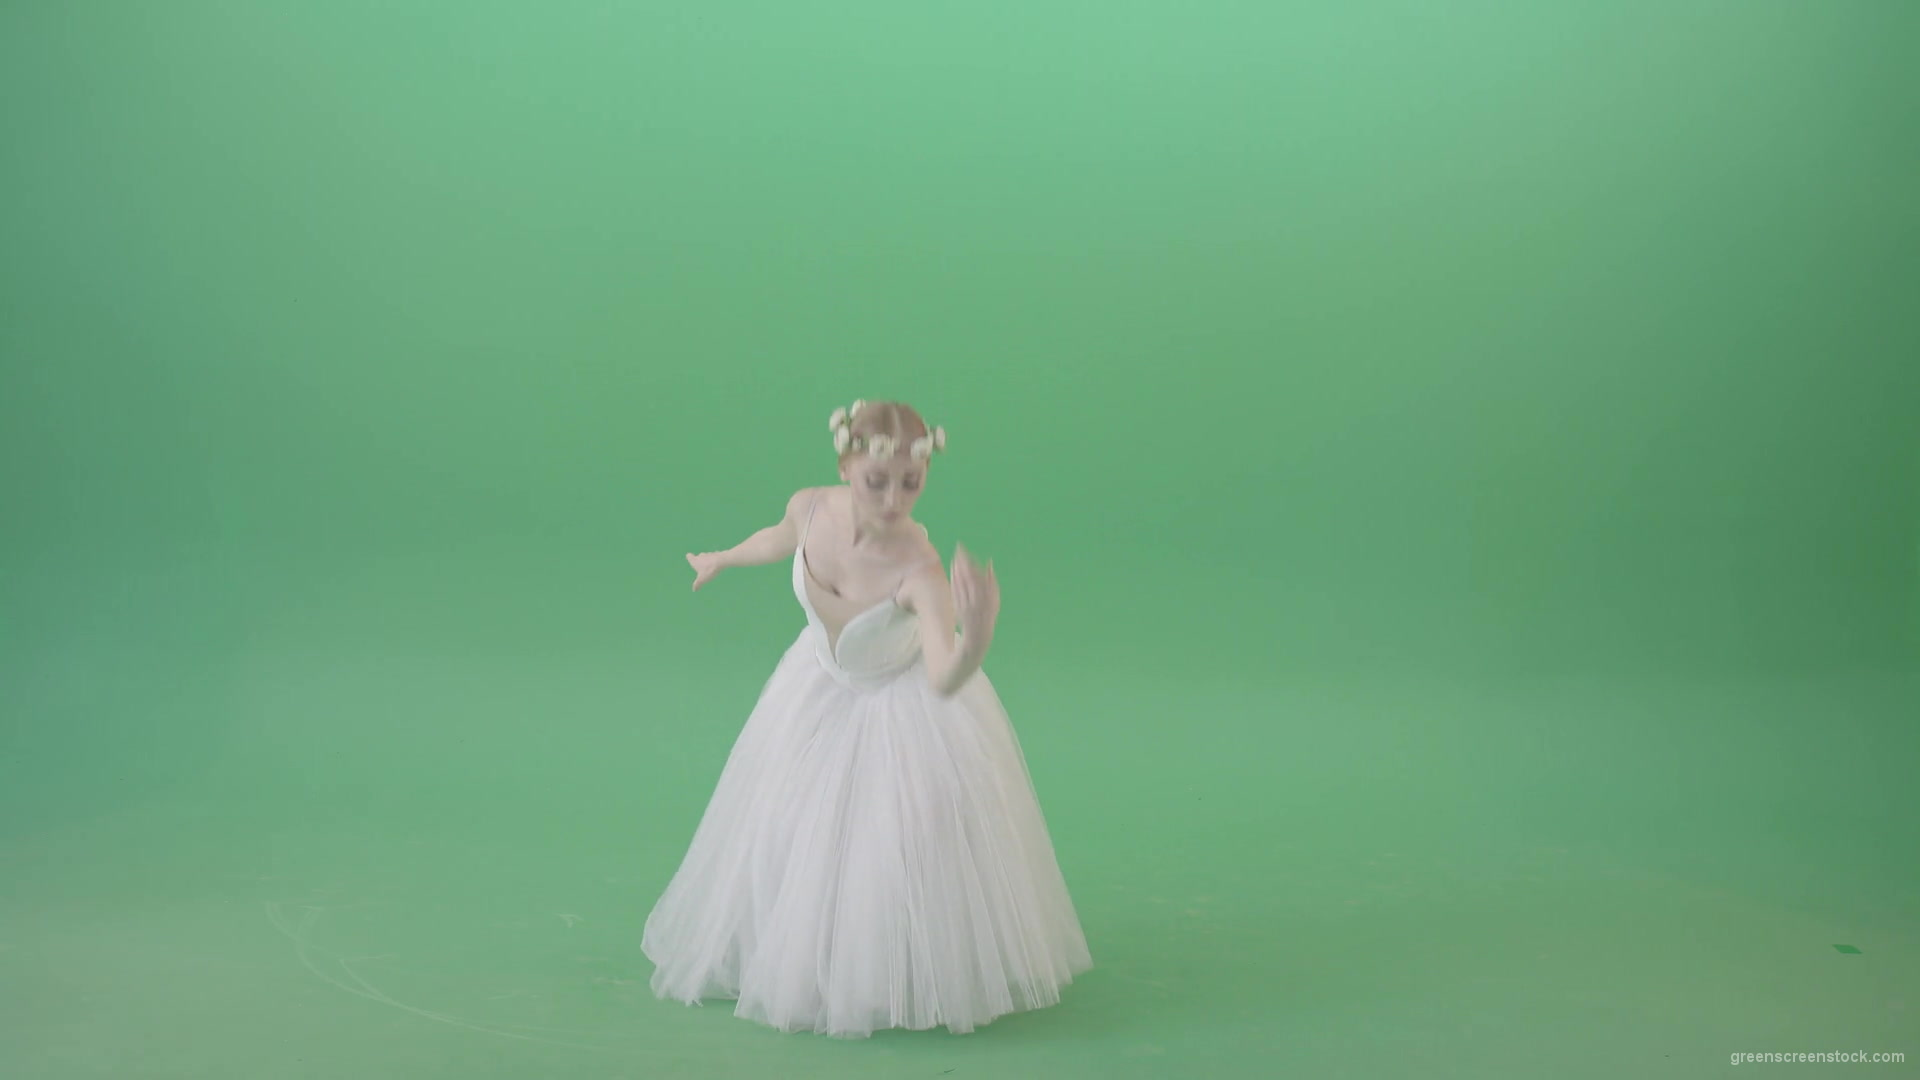 Ballet-Art-Princes-making-royal-regards-in-white-wedding-dress-isolated-on-green-screen-4K-Video-Footage-1920_008 Green Screen Stock